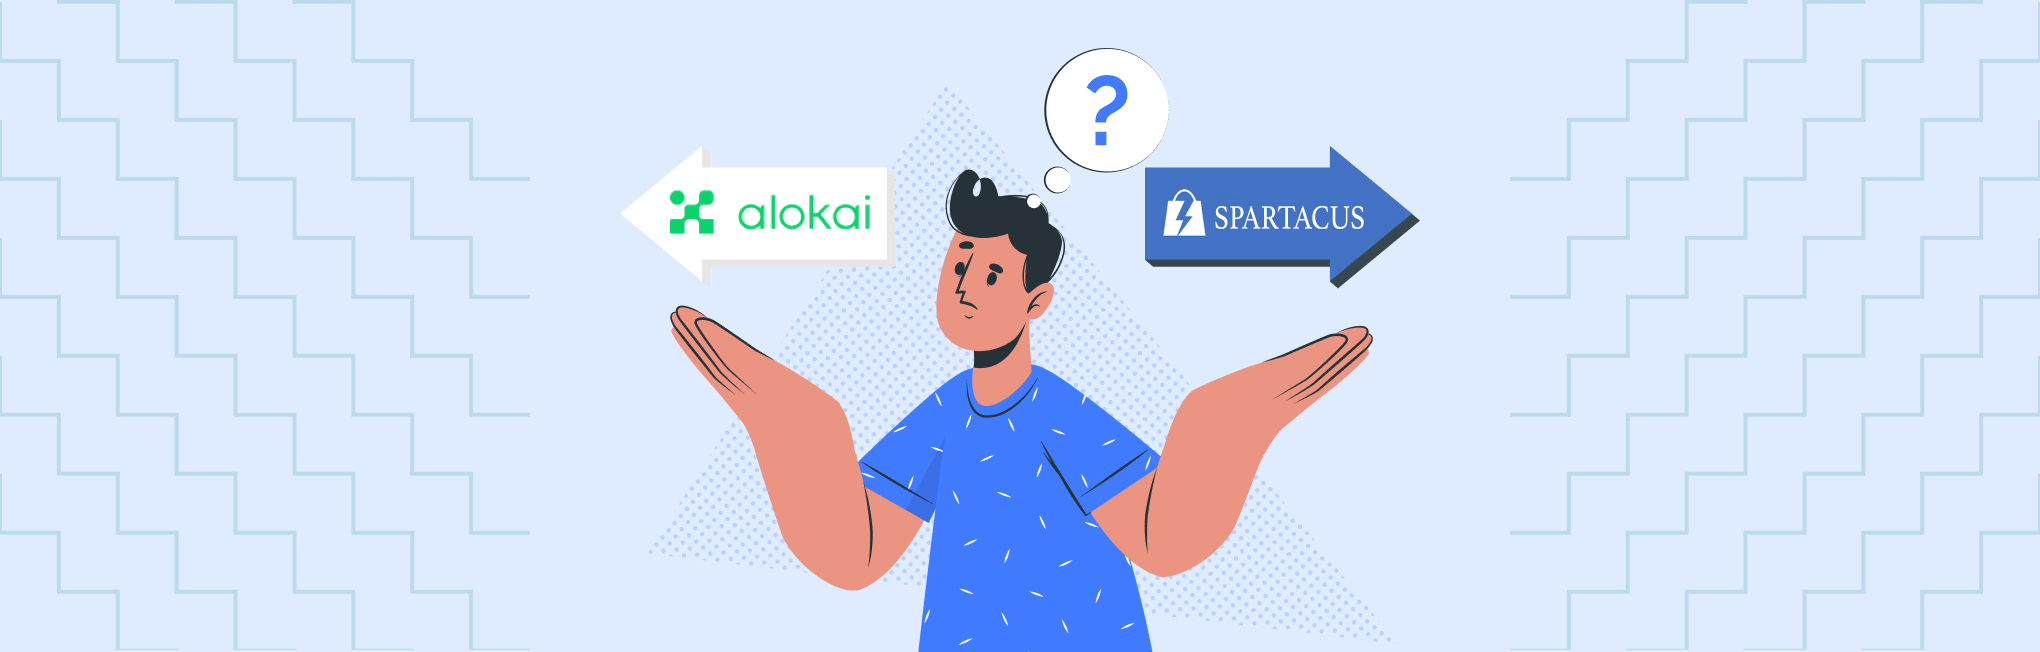 Alokai (Formerly Vue Storefront) vs. Spartacus: Which Headless Frontend is Better?